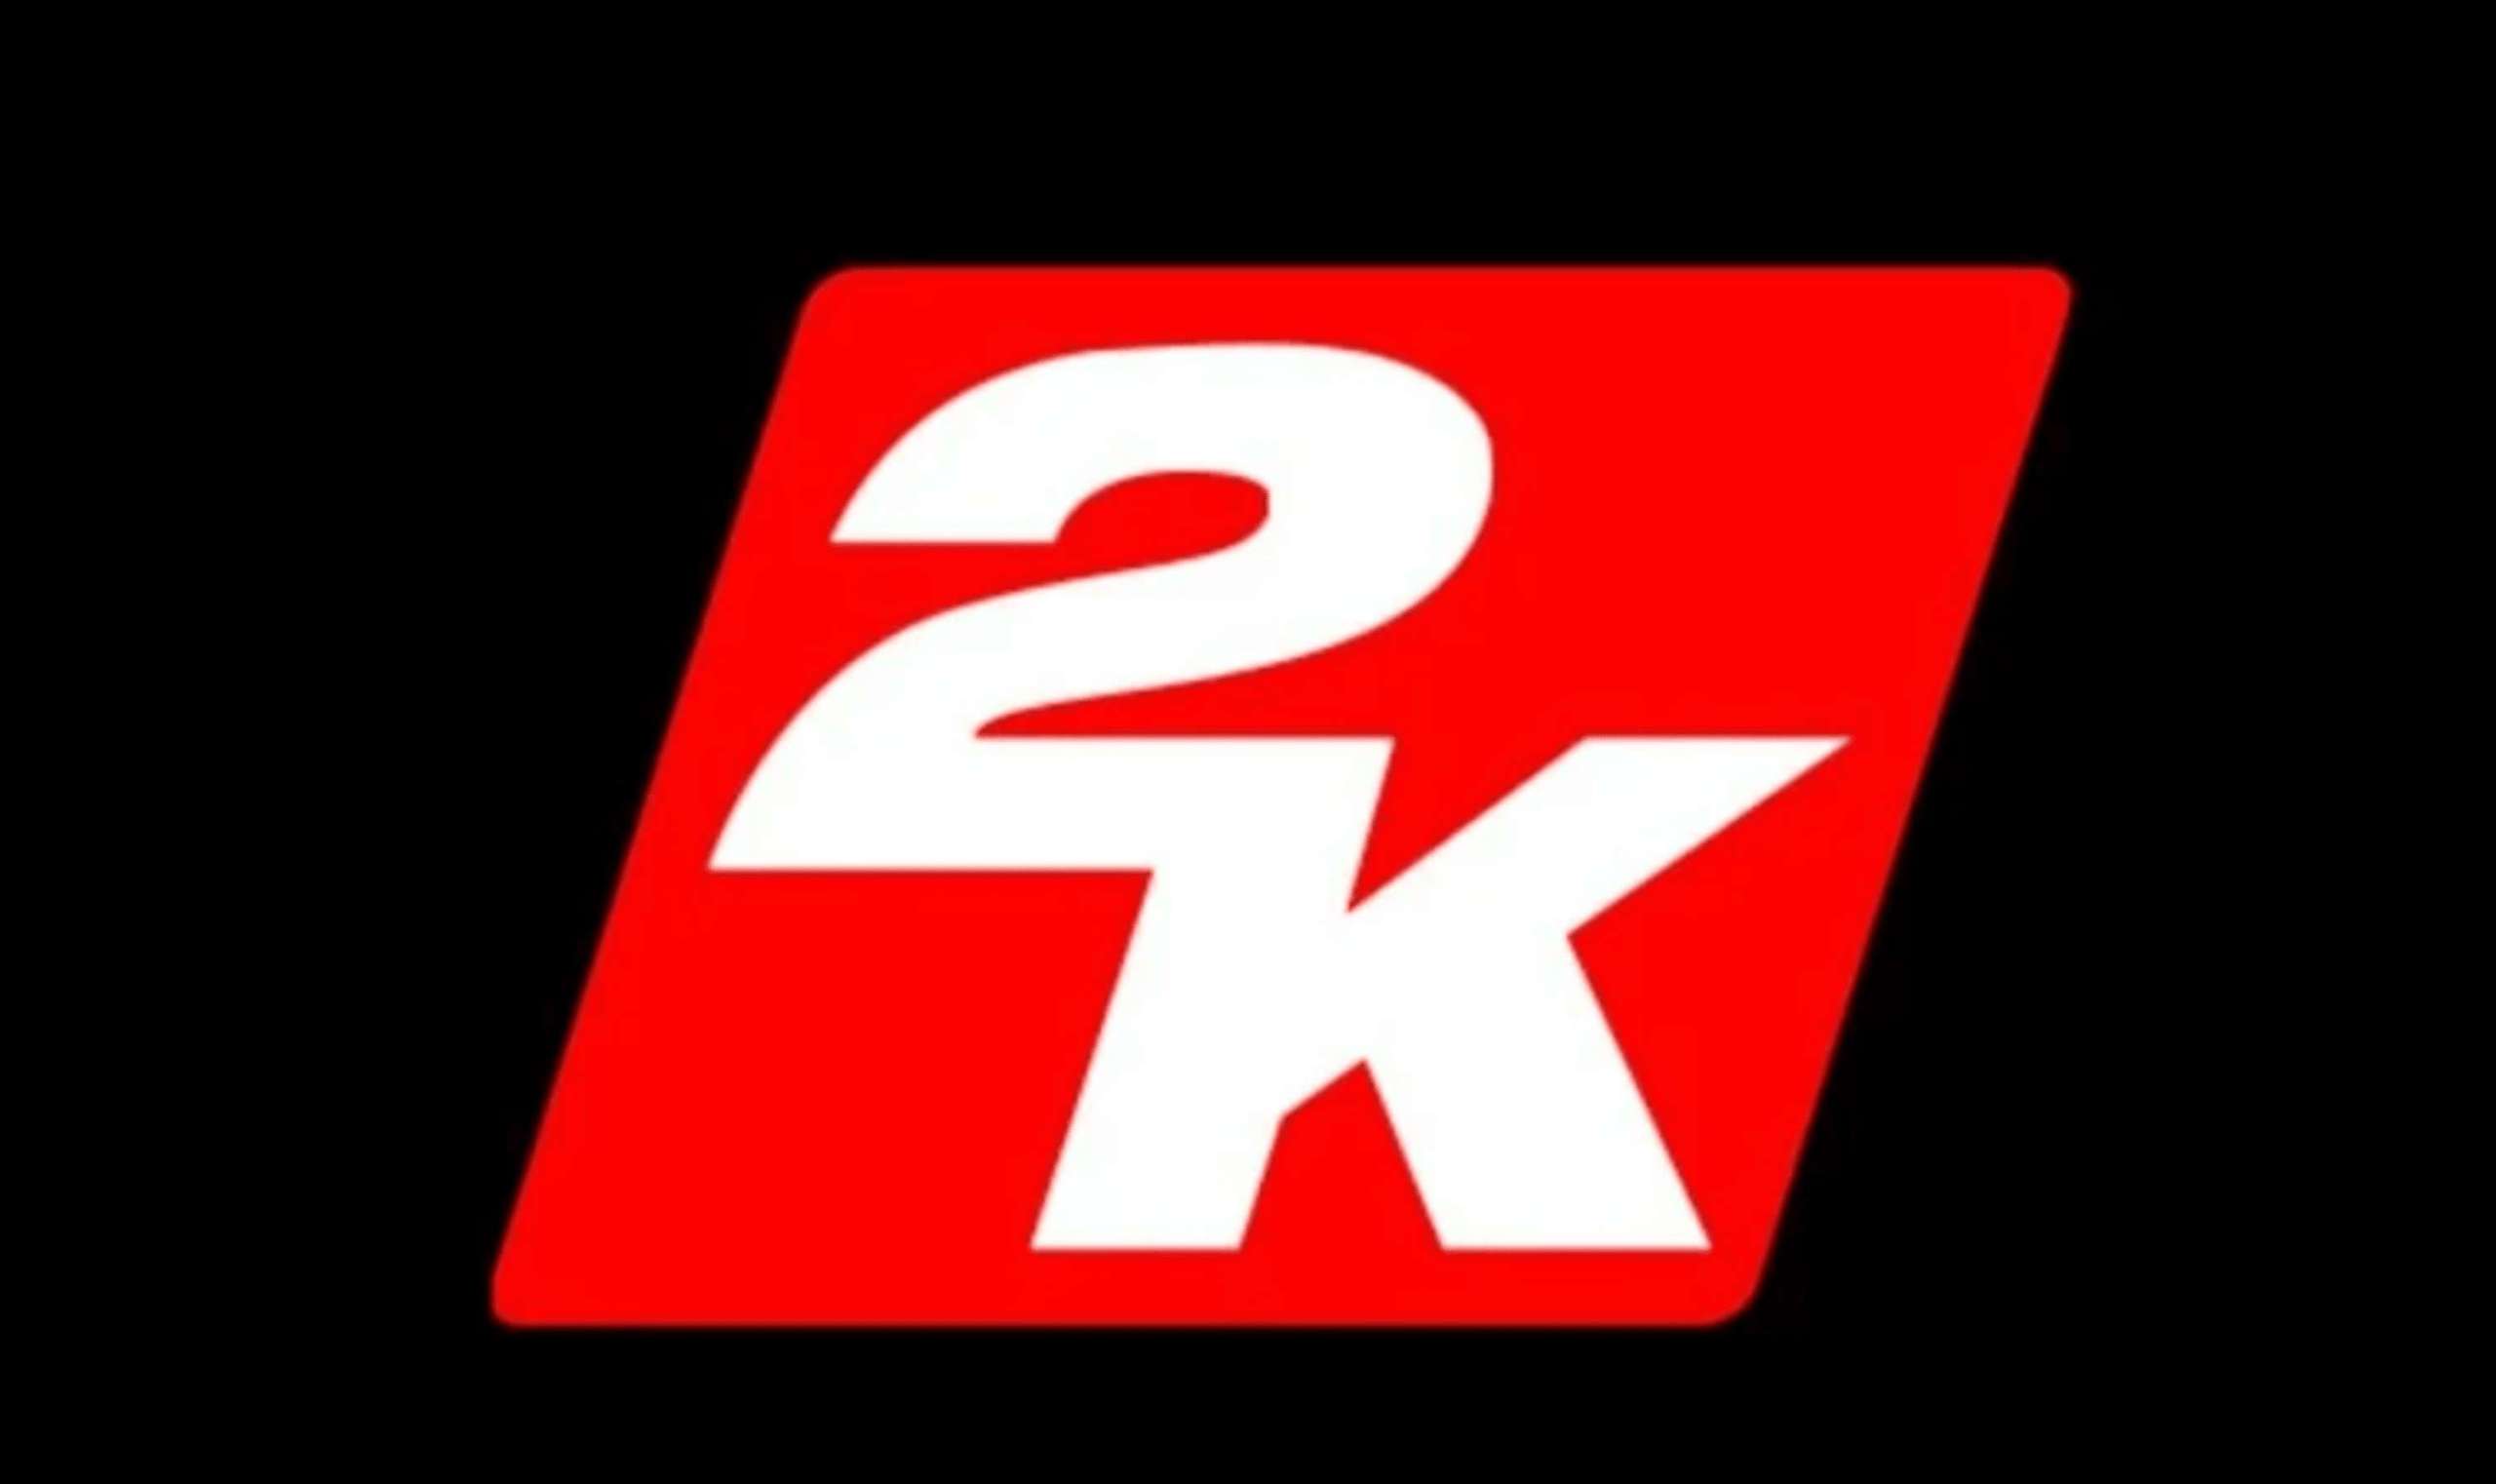 Users Of 2K Games Are Urged To Update Their Passwords Following A Hack Into The Publisher’s Customer Service Portal